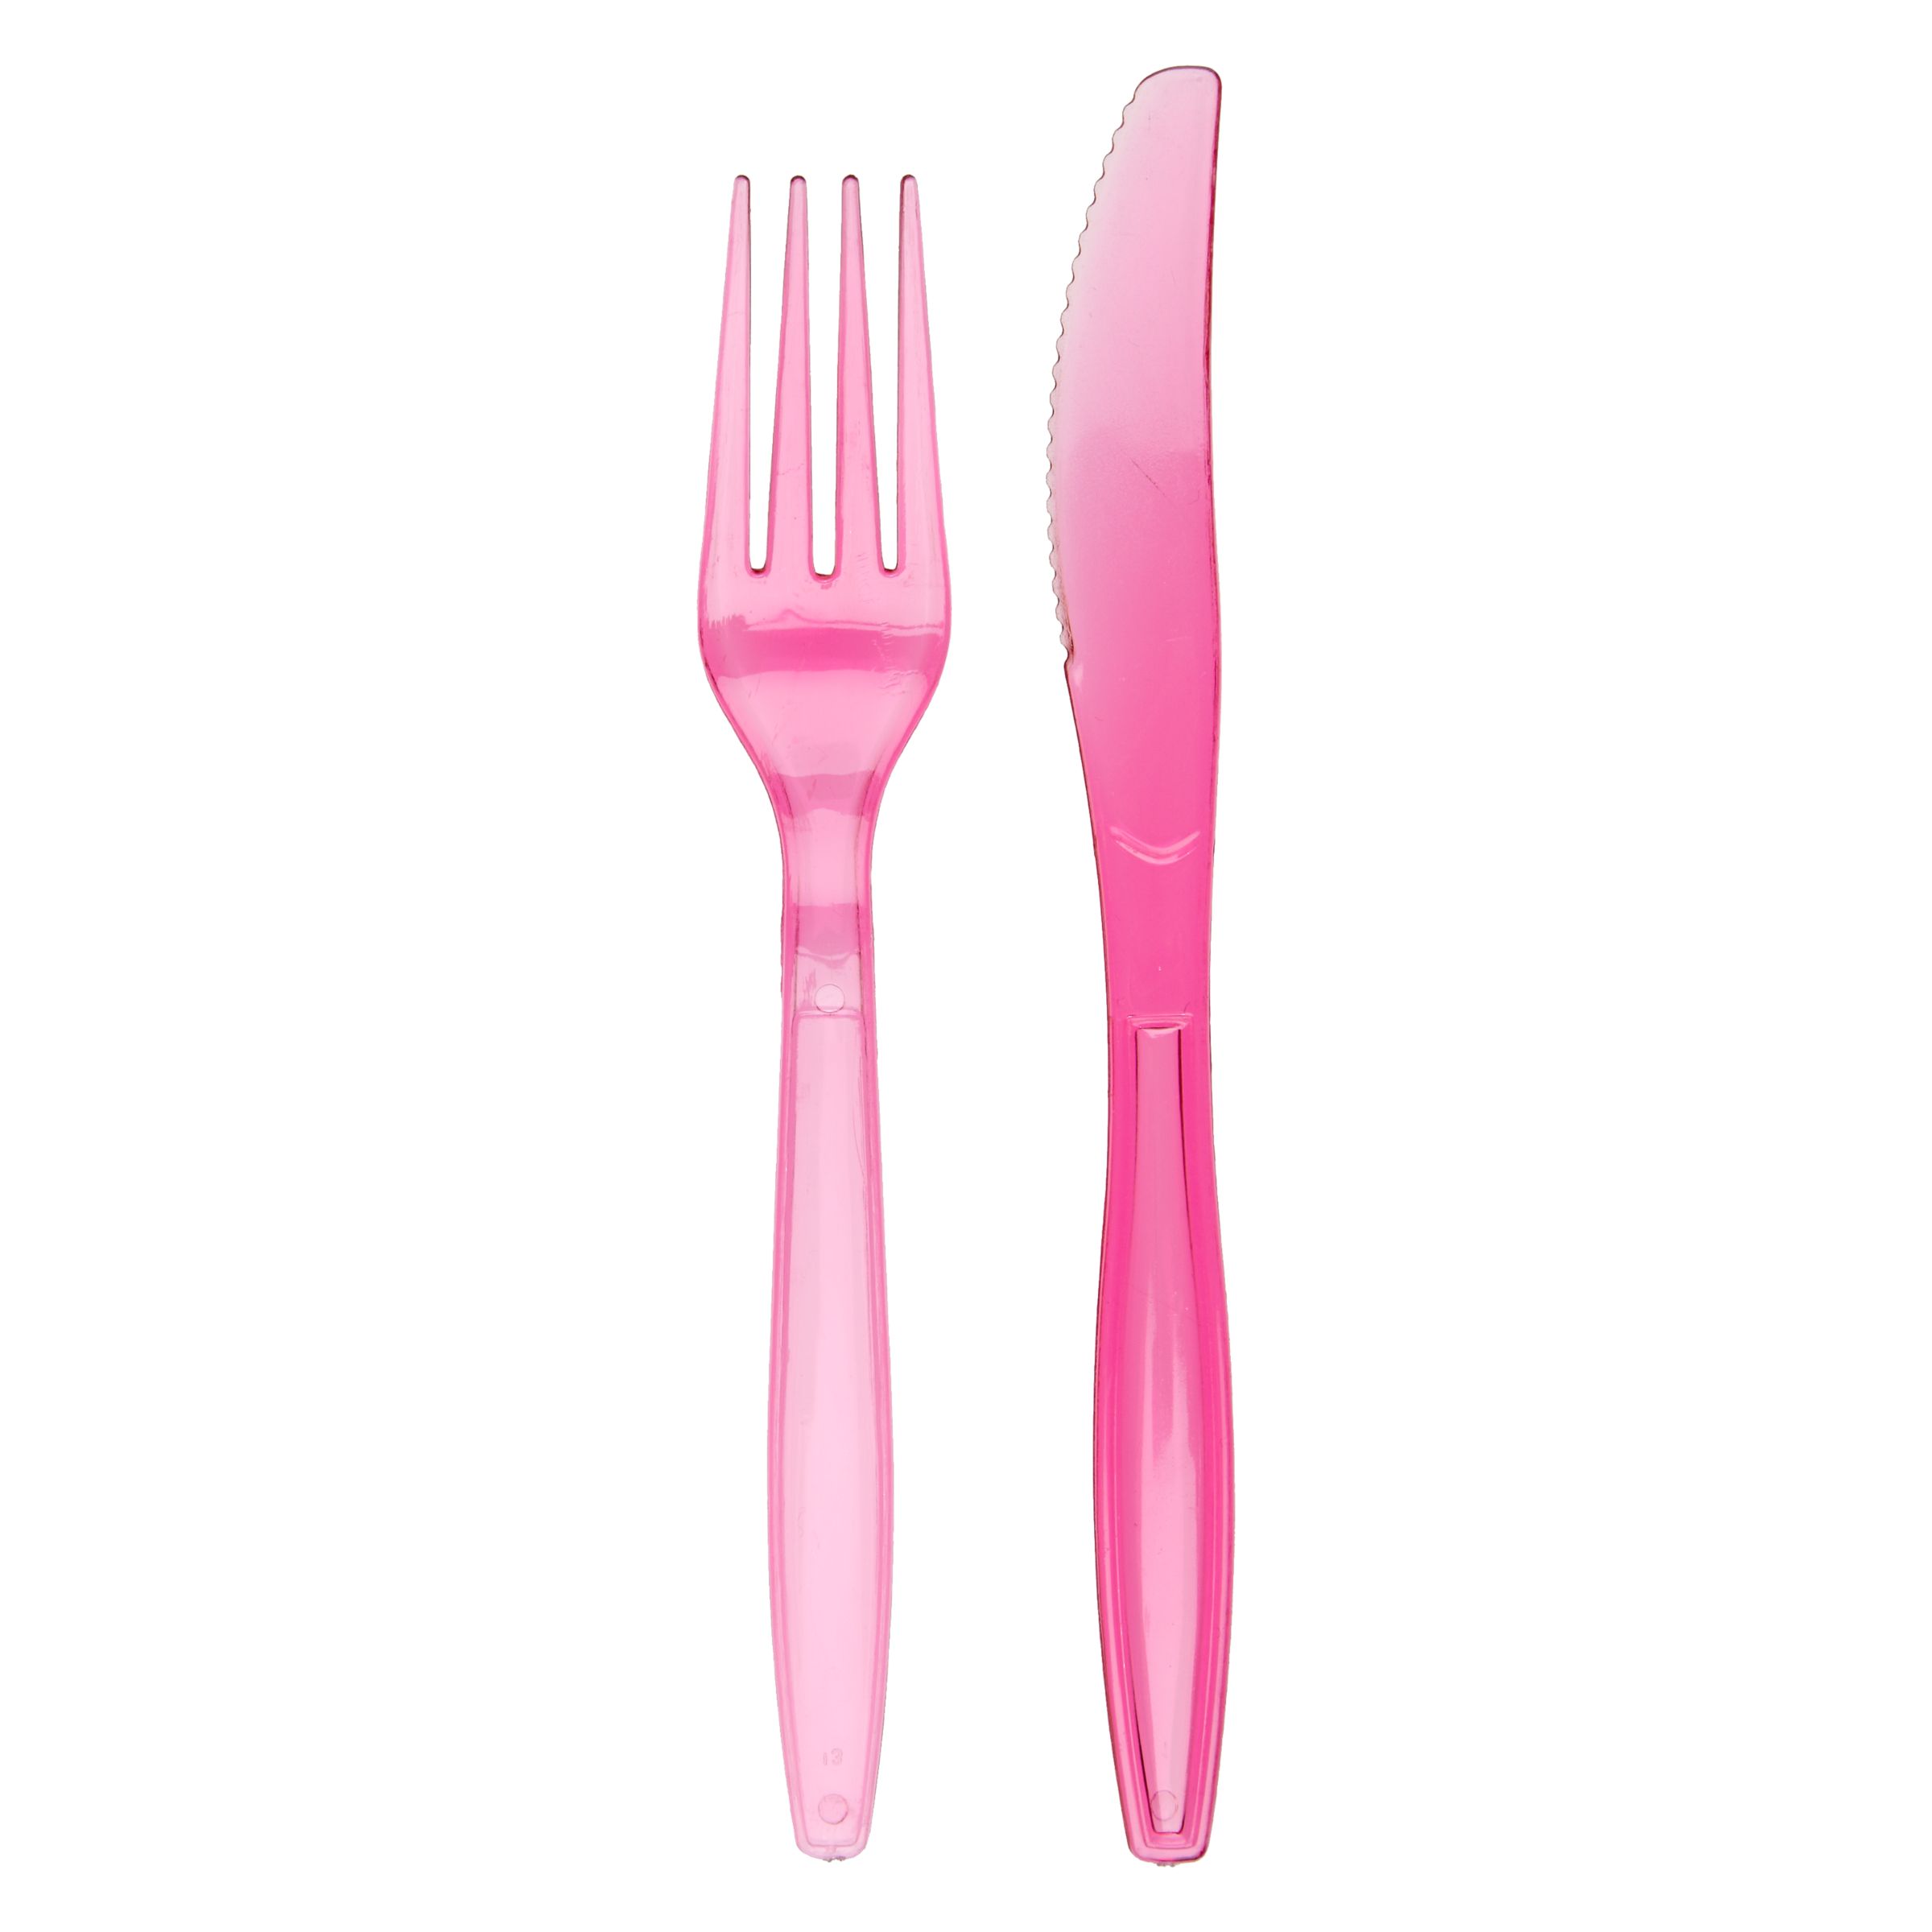 Duni Cutlery Set, Pack Of 20, Pink